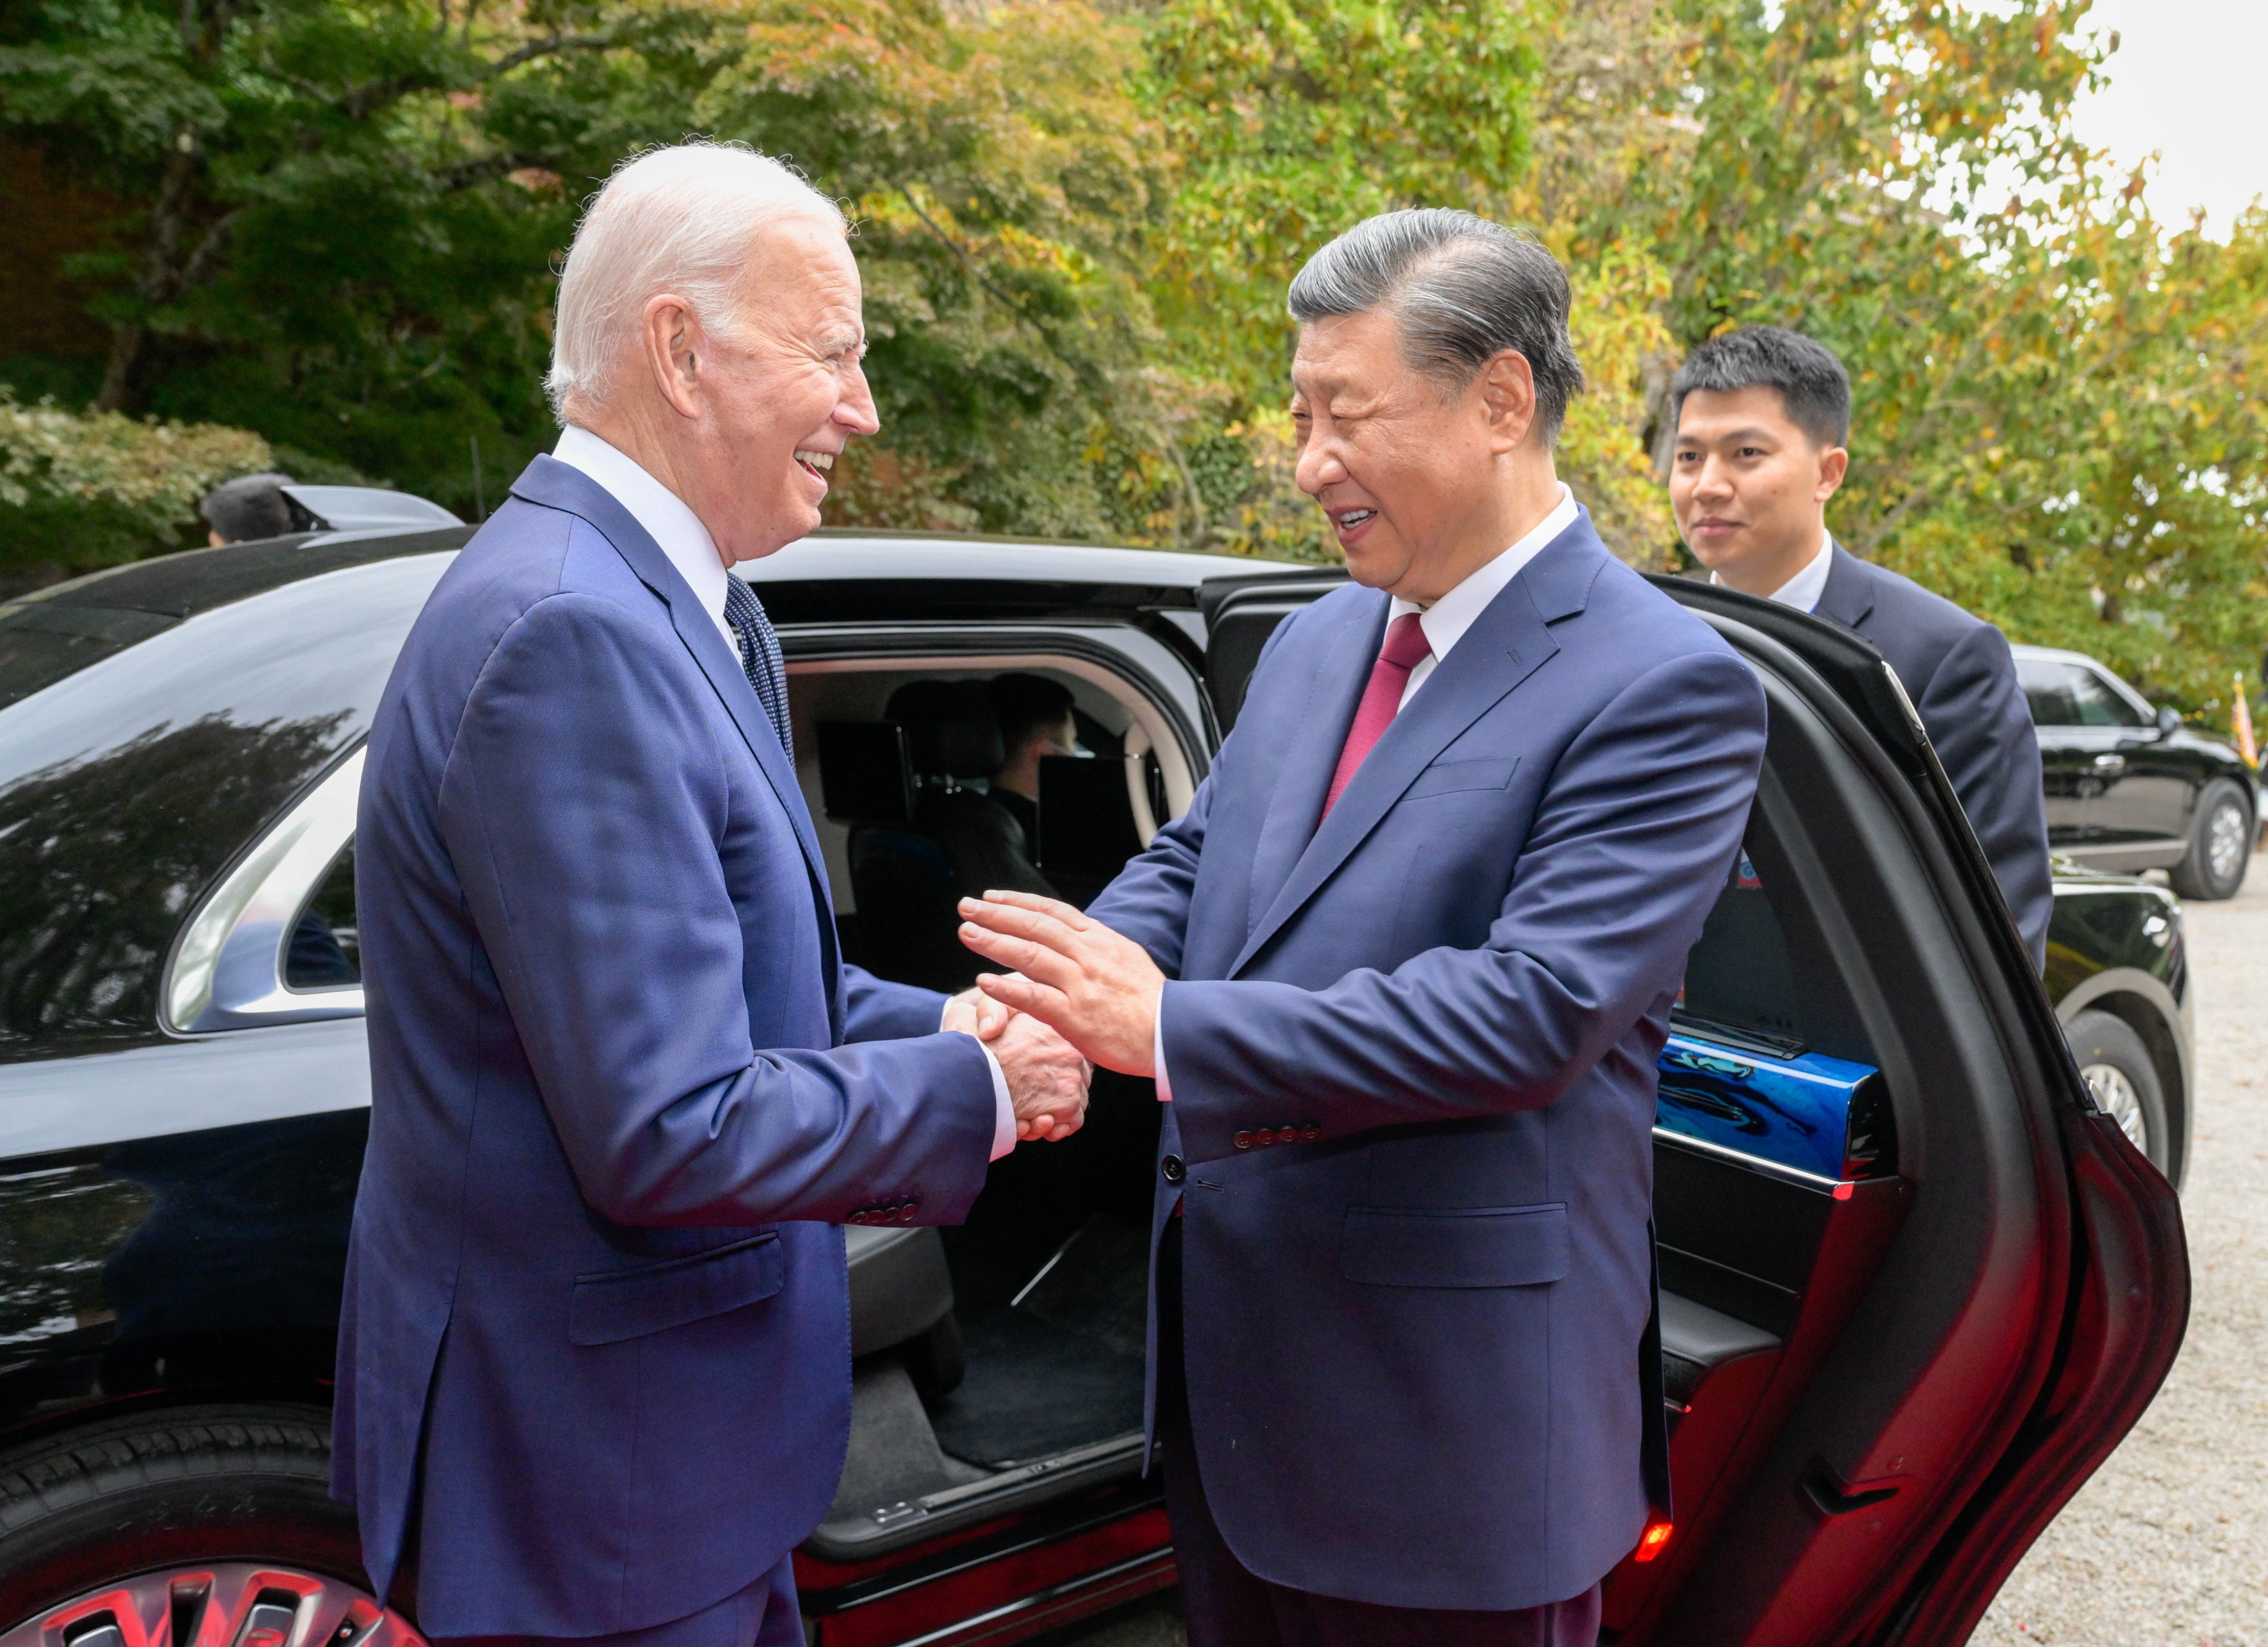 According to an official Chinese readout, Xi Jinping told Joe Biden that bilateral ties were “beginning to stabilise” despite growing “negative factors”, but warned that they could “slide into conflict or confrontation”. Photo: EPA-EFE